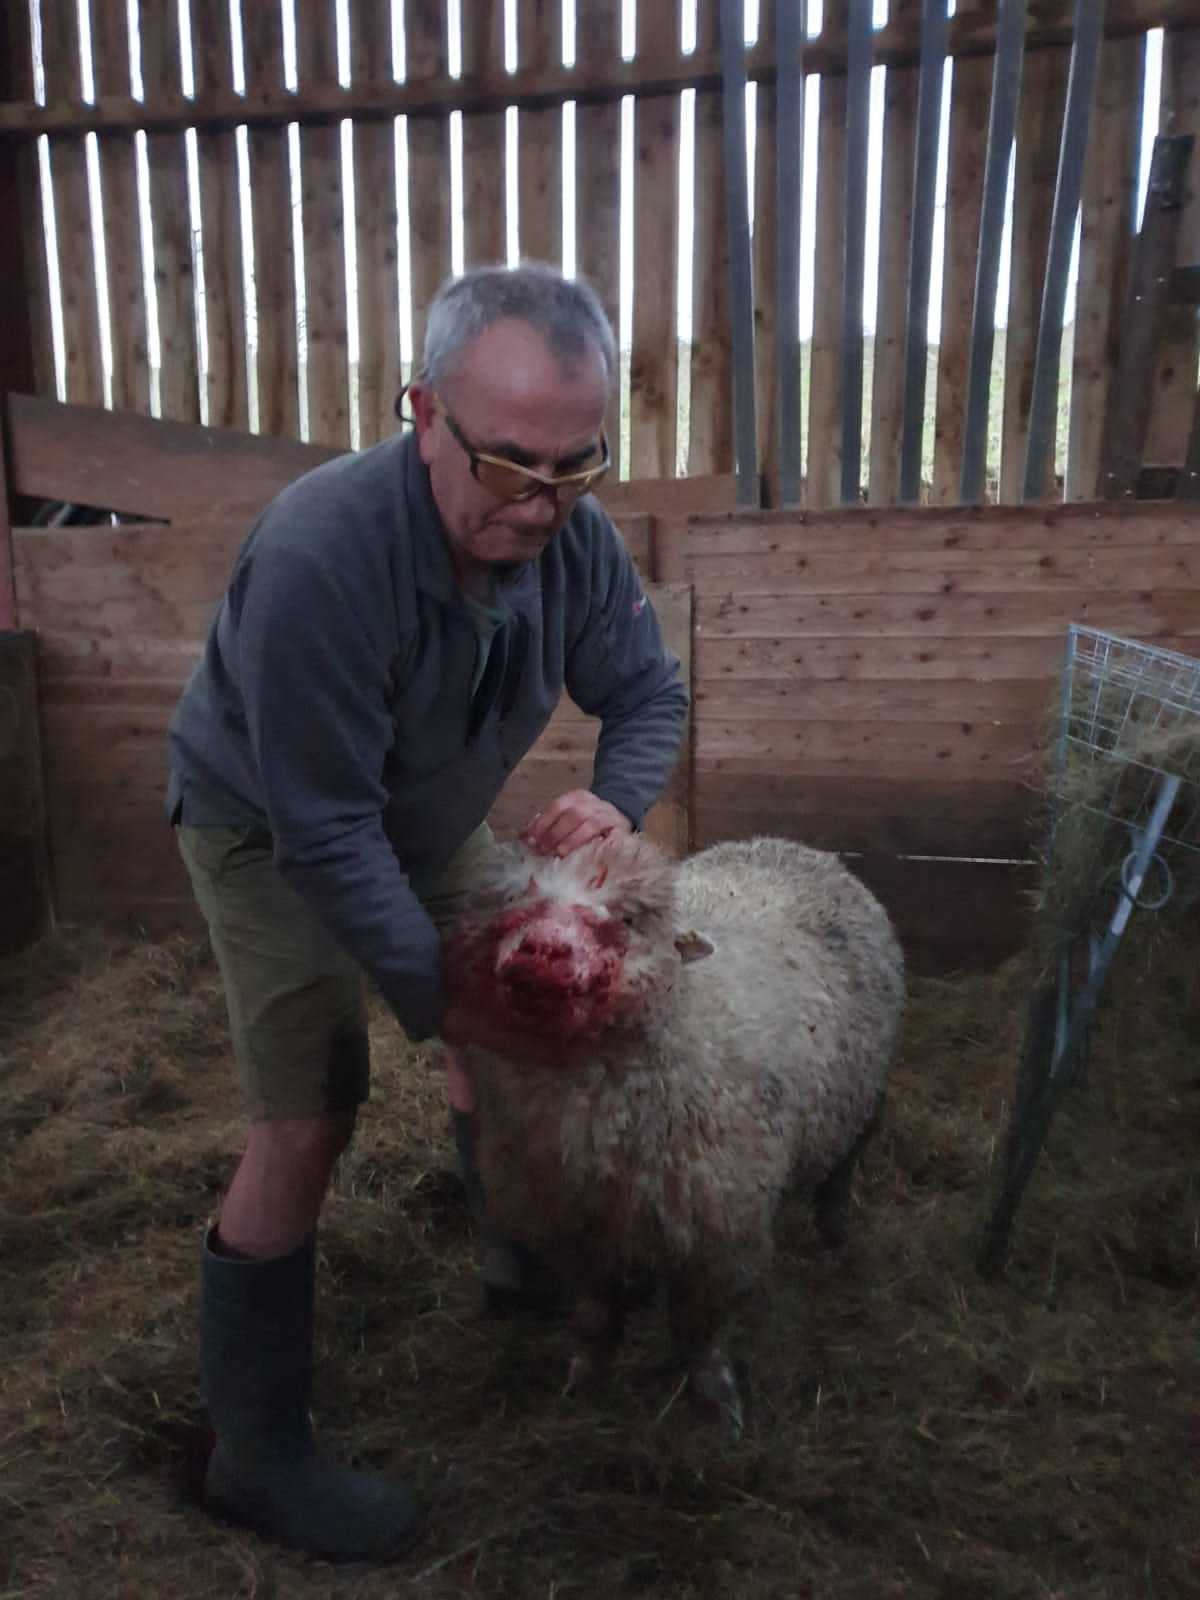 Stuart Alderson with the ewe which has been attacked